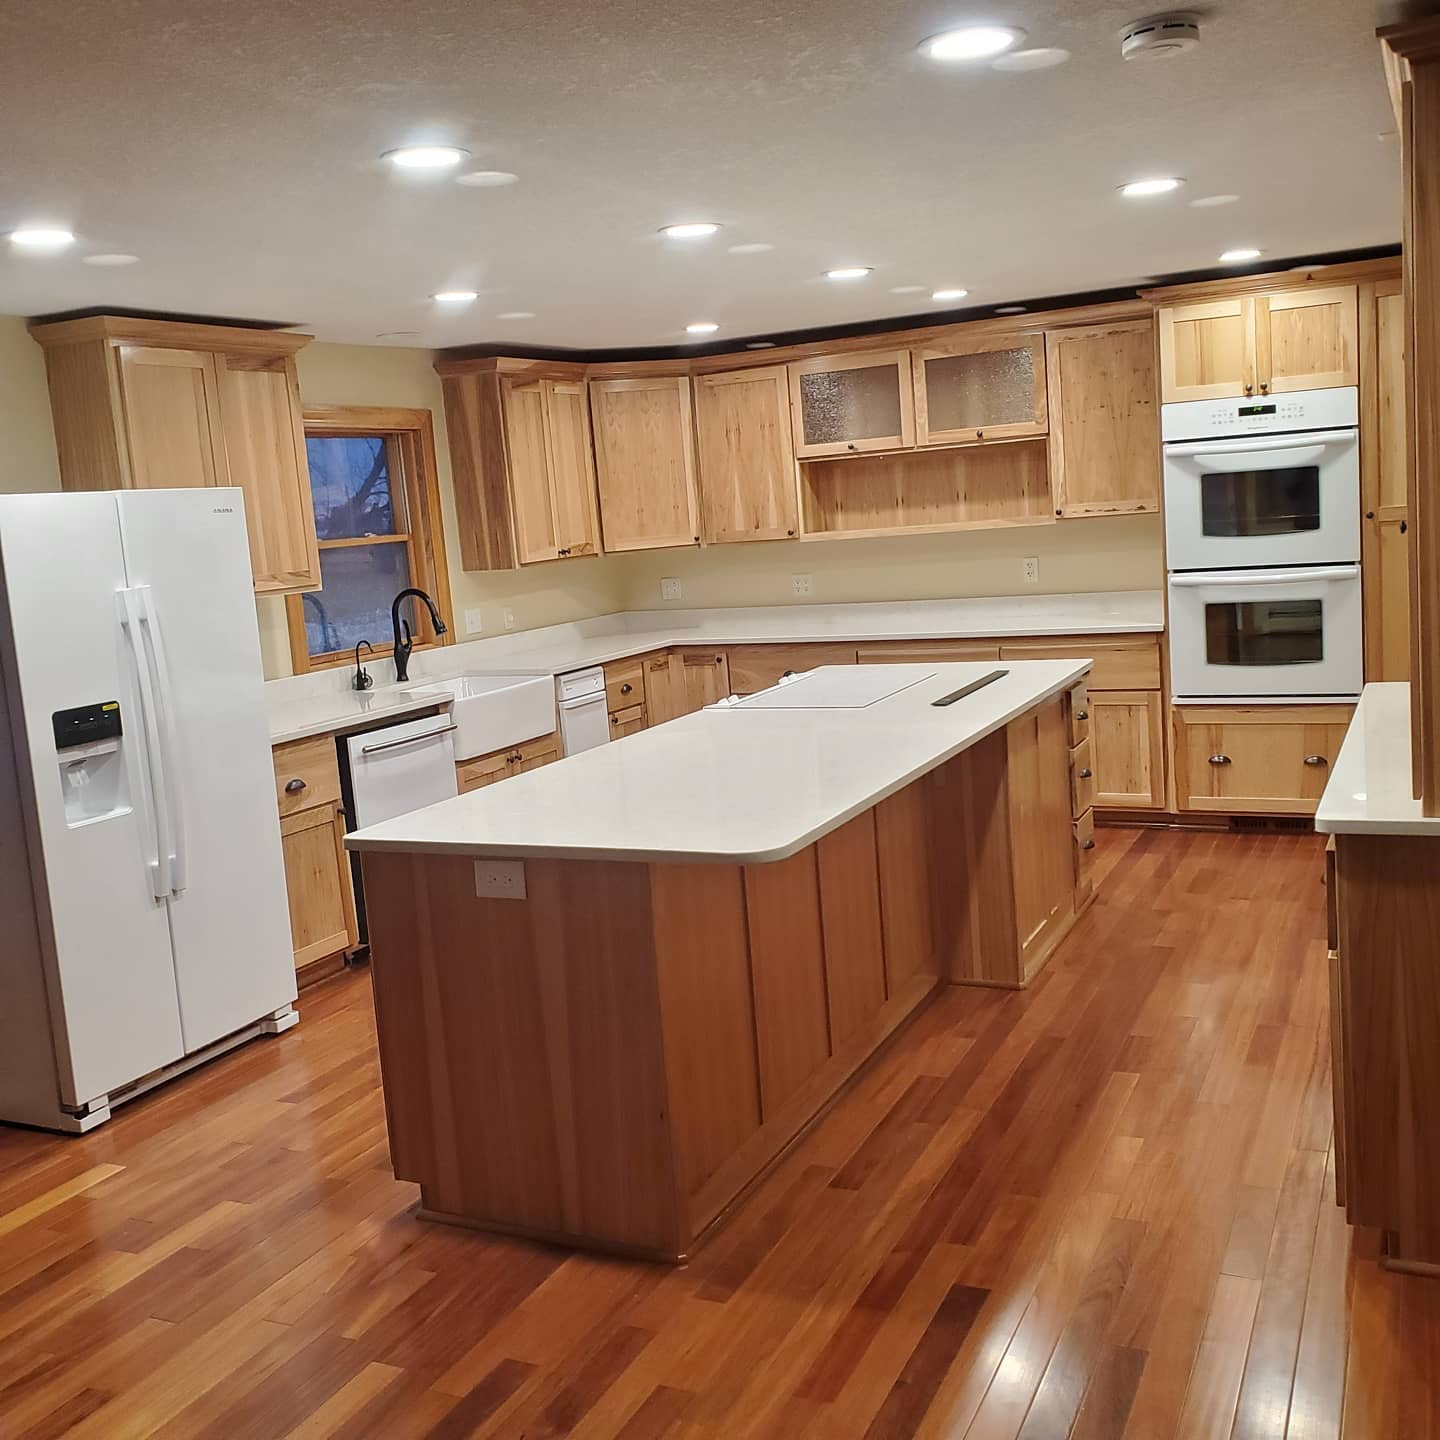 New Germany Kitchen Cabinets